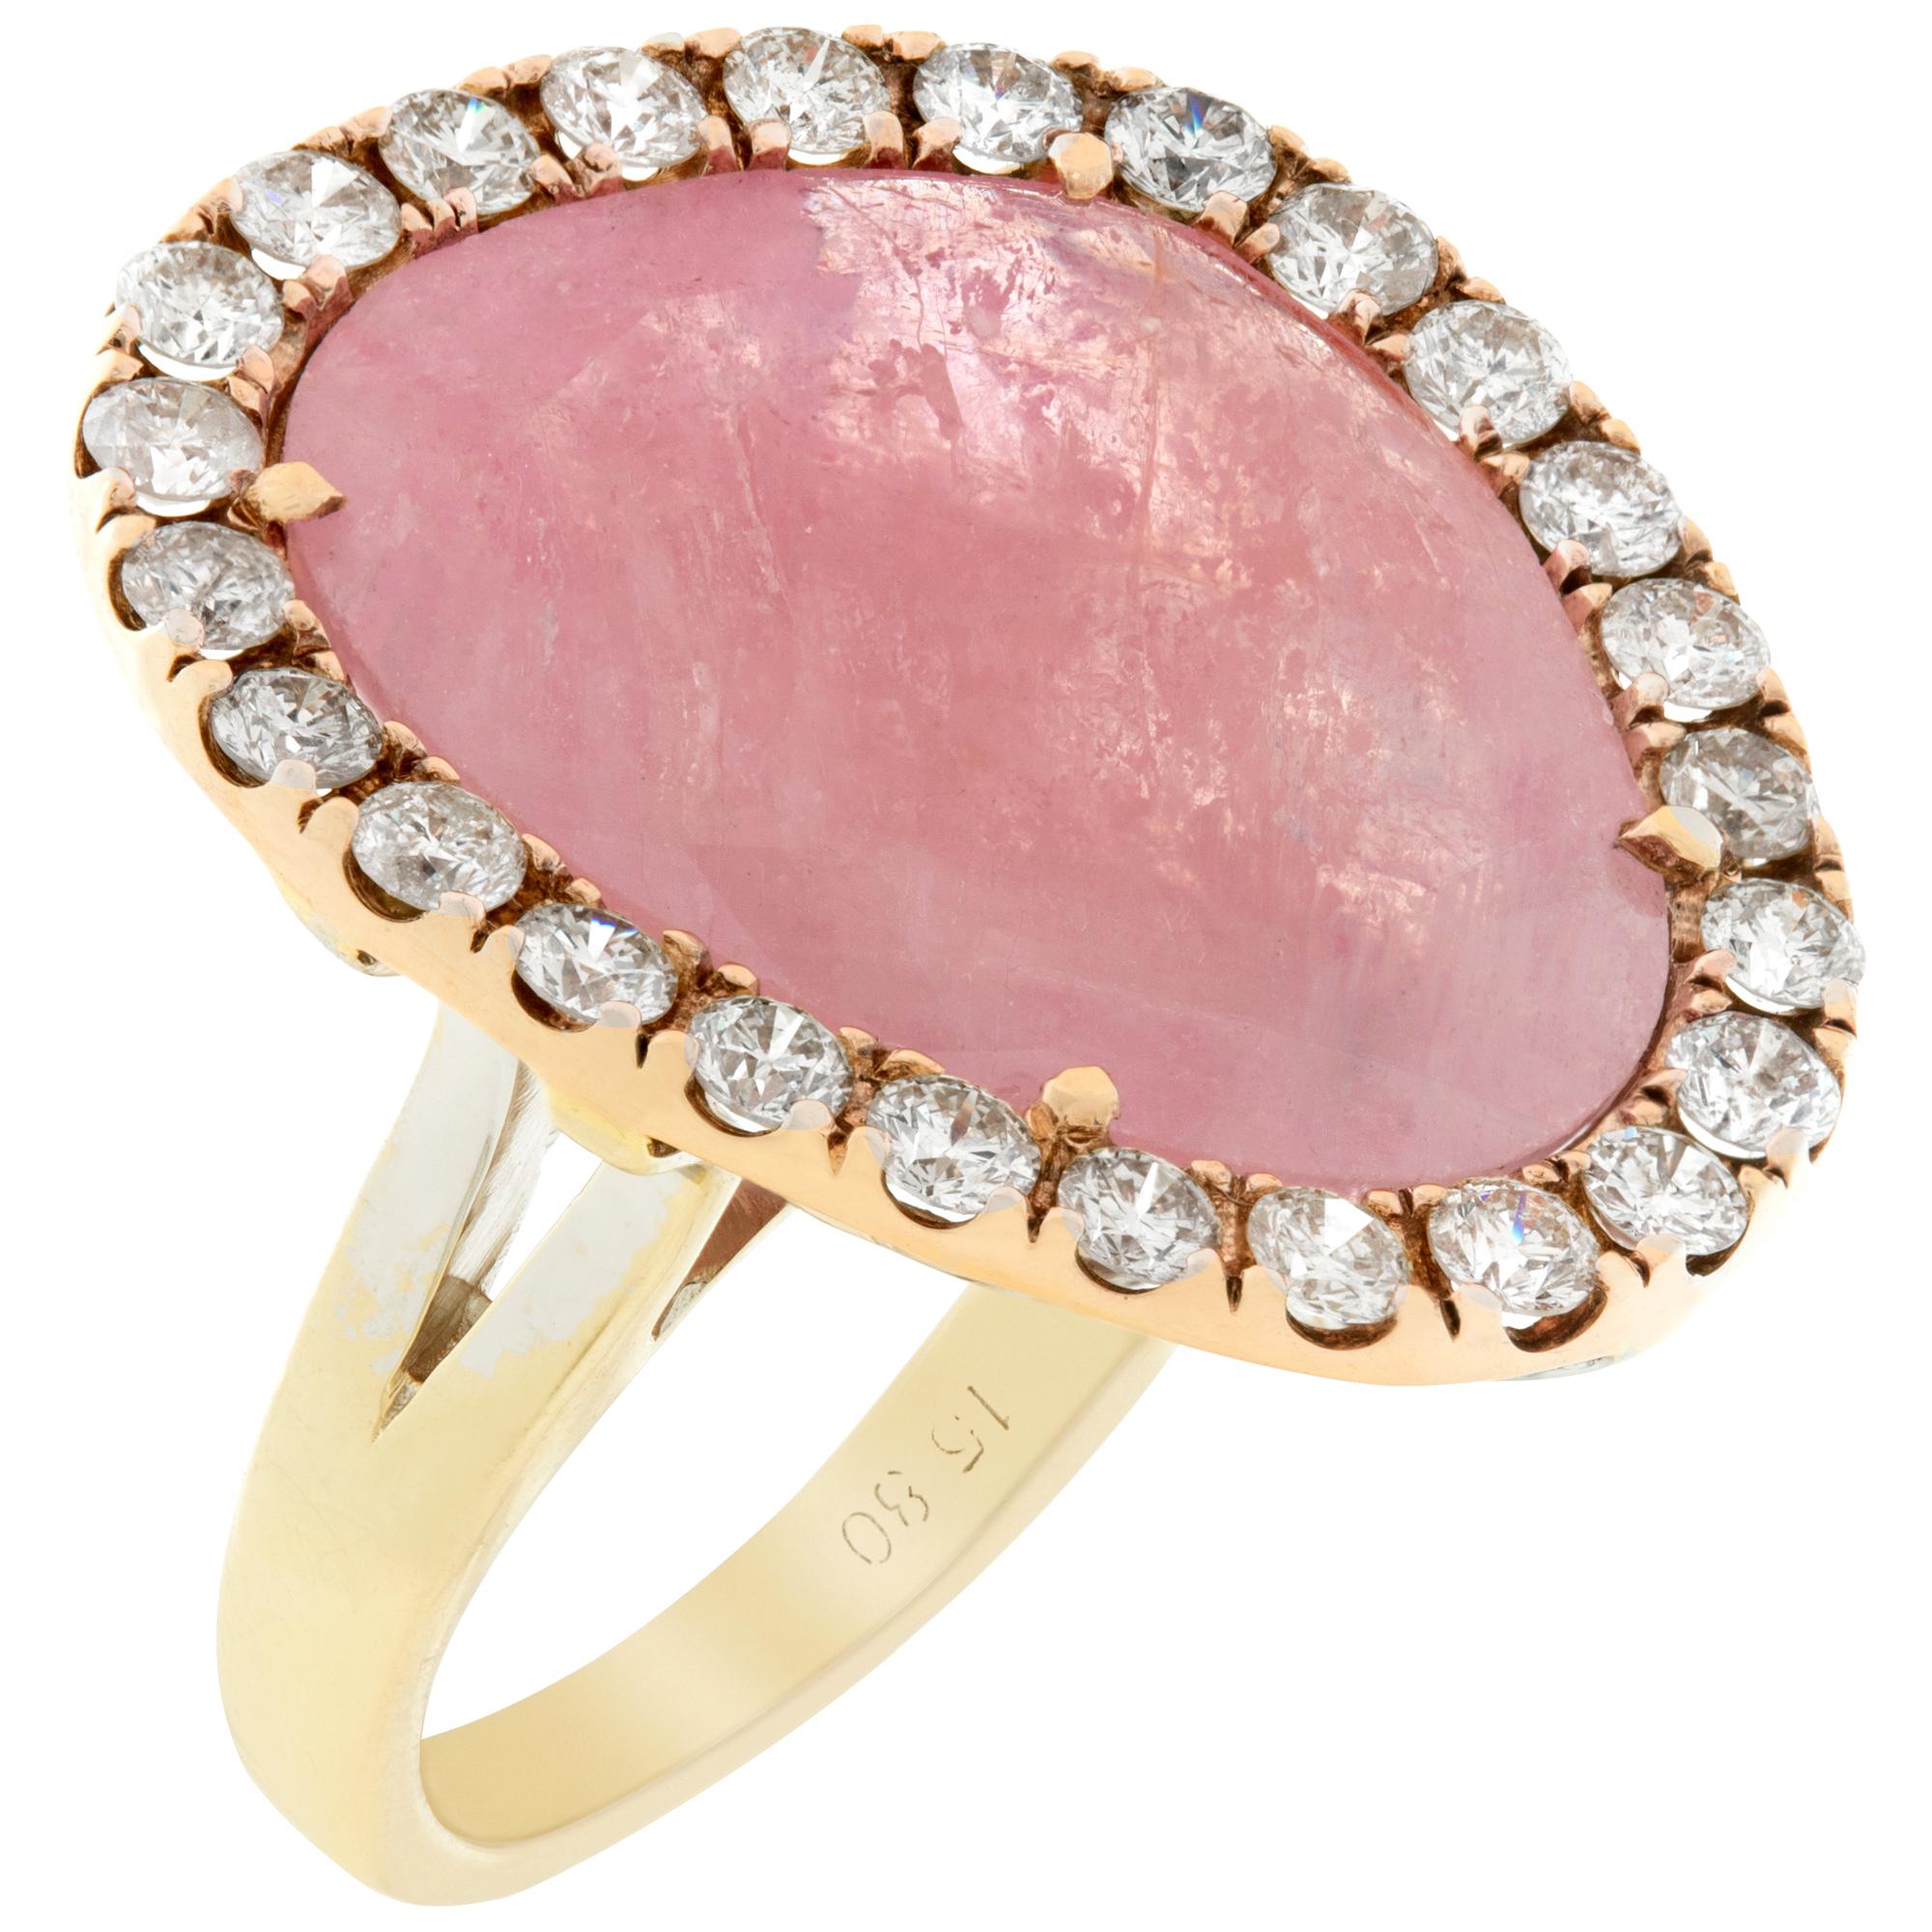 Rose quartz faceted ring w/ 1.00ct in surrounding diamonds in white & rose gold In Excellent Condition For Sale In Surfside, FL